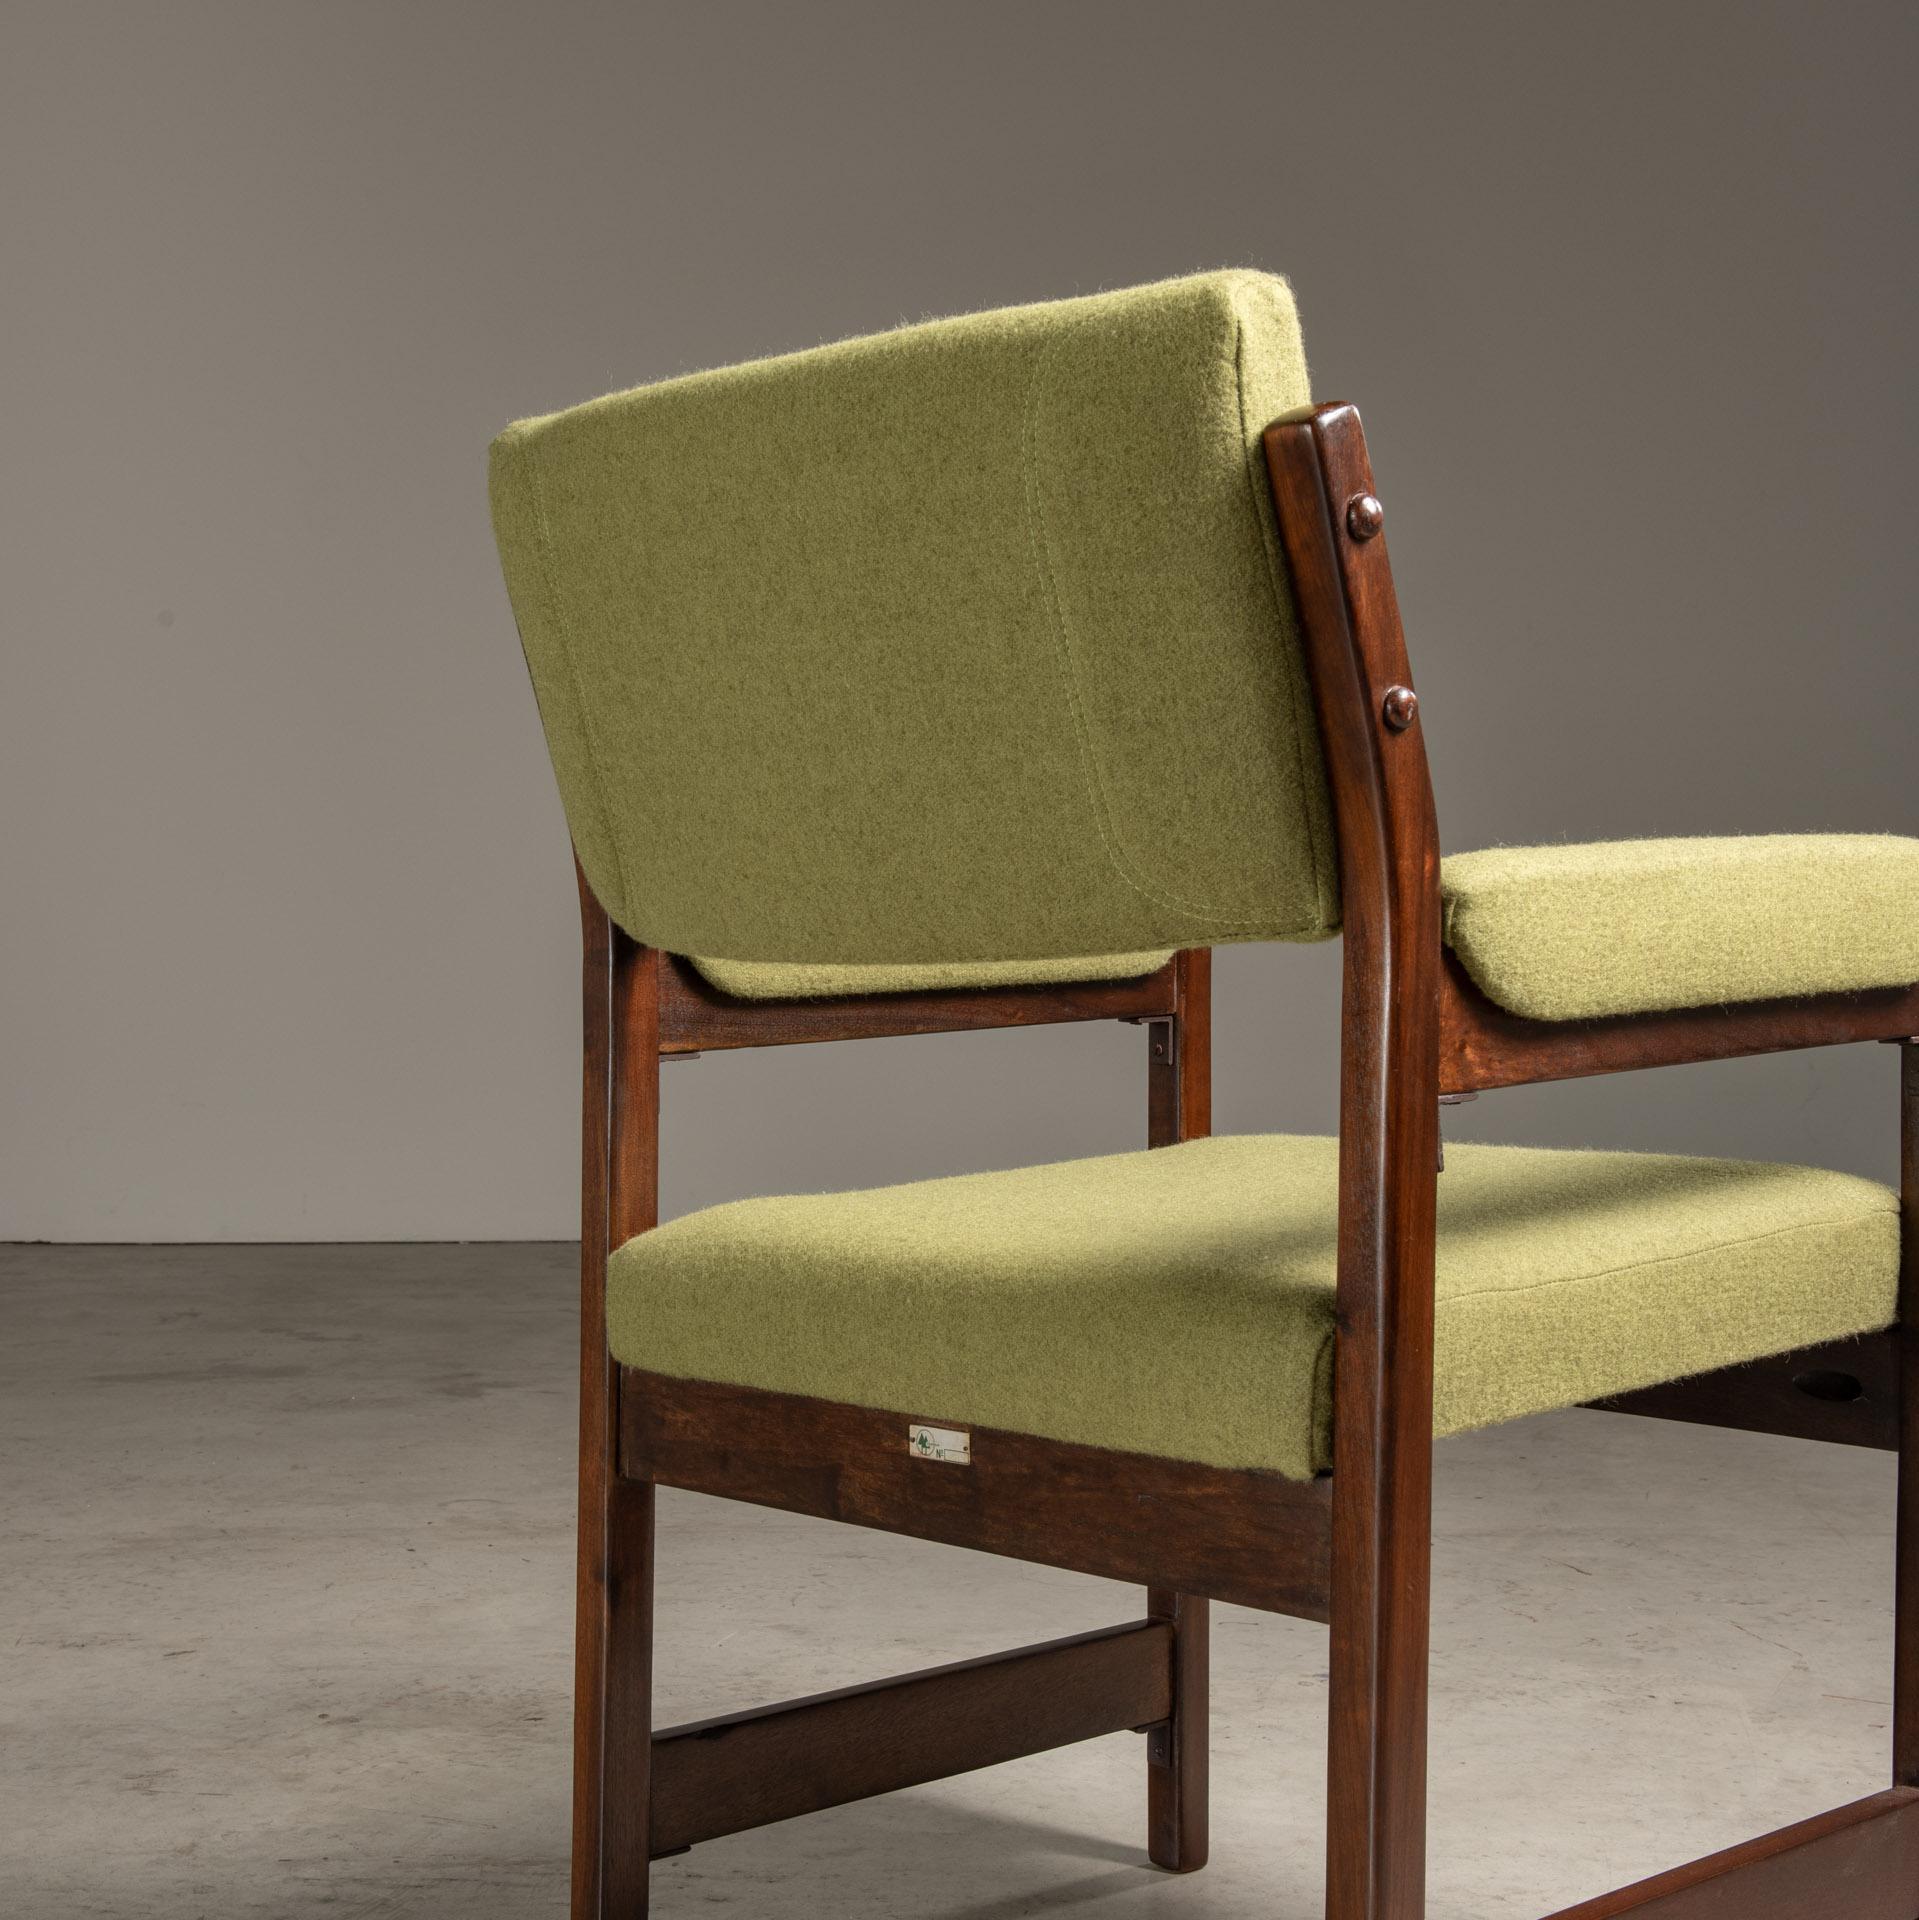 Set of Chairs in Solid Hardwood and Green Fabric, Brazilian Mid-Century Modern For Sale 3